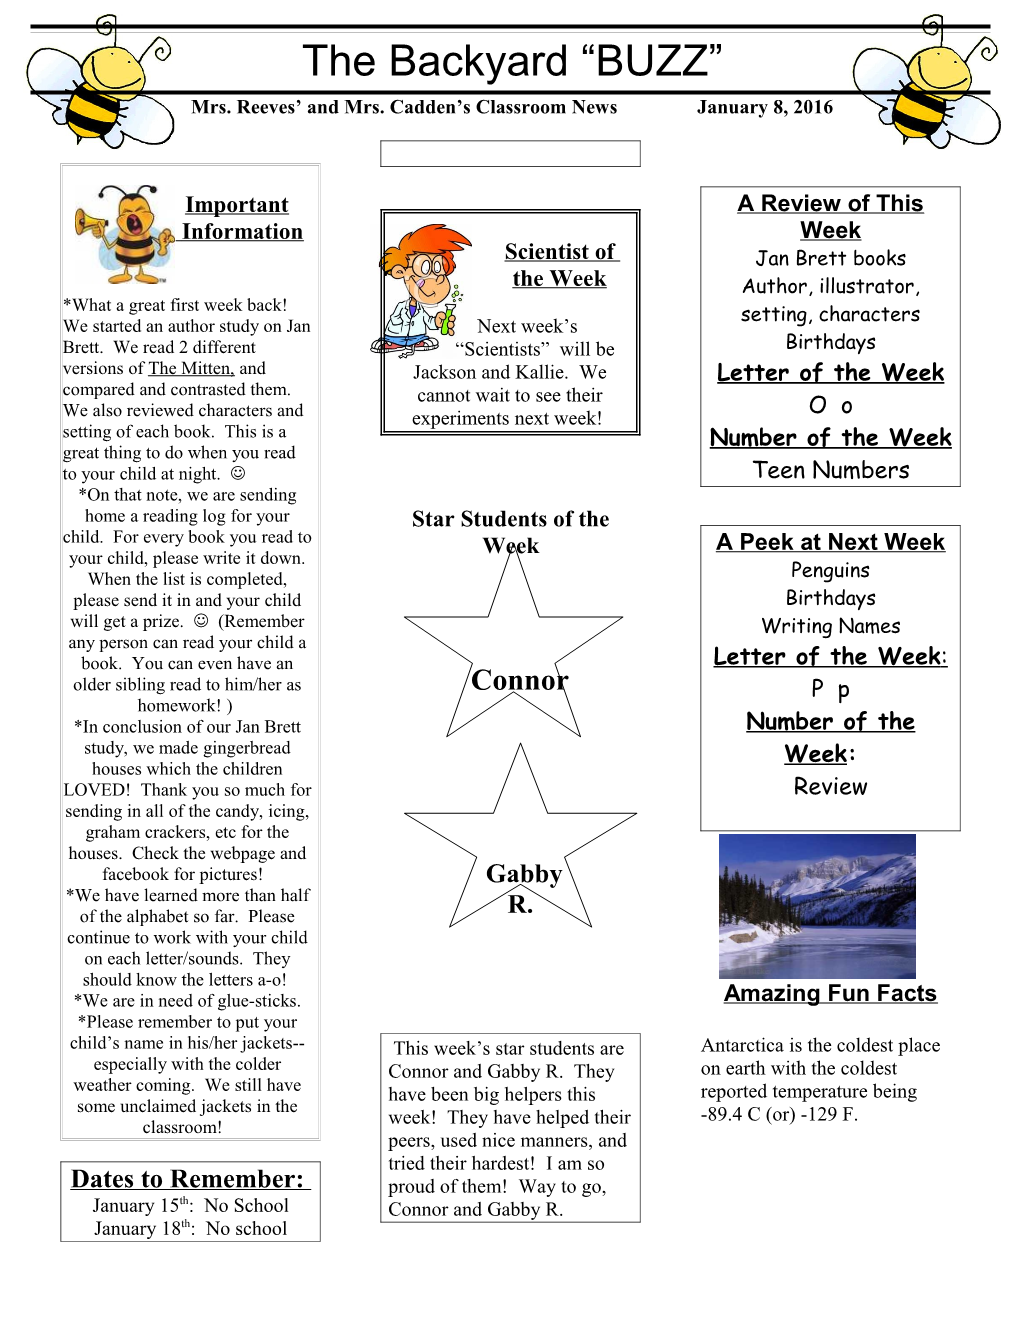 Mrs. Reeves and Mrs. Cadden S Classroom News January 8, 2016